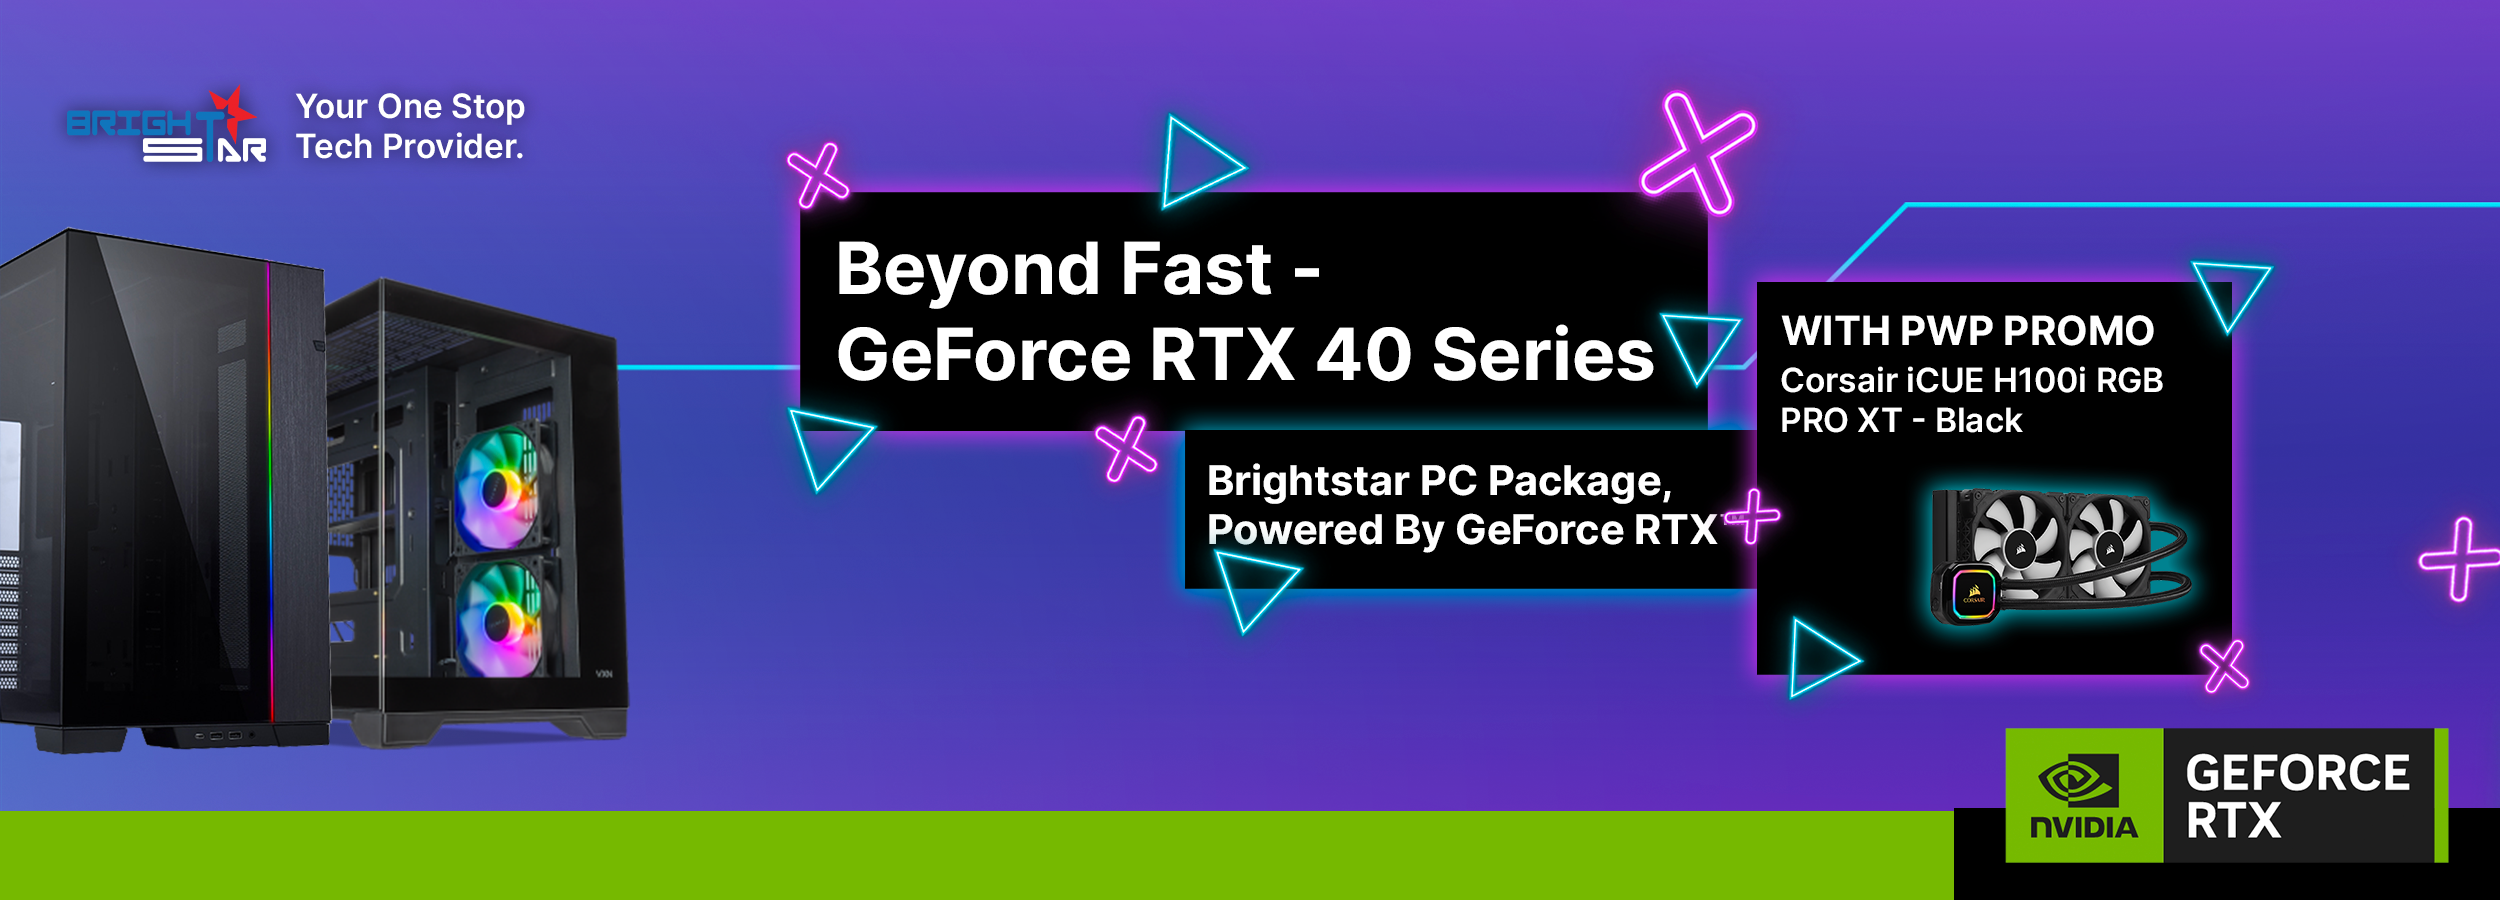 NVIDIA Q2 PC Package - Banner